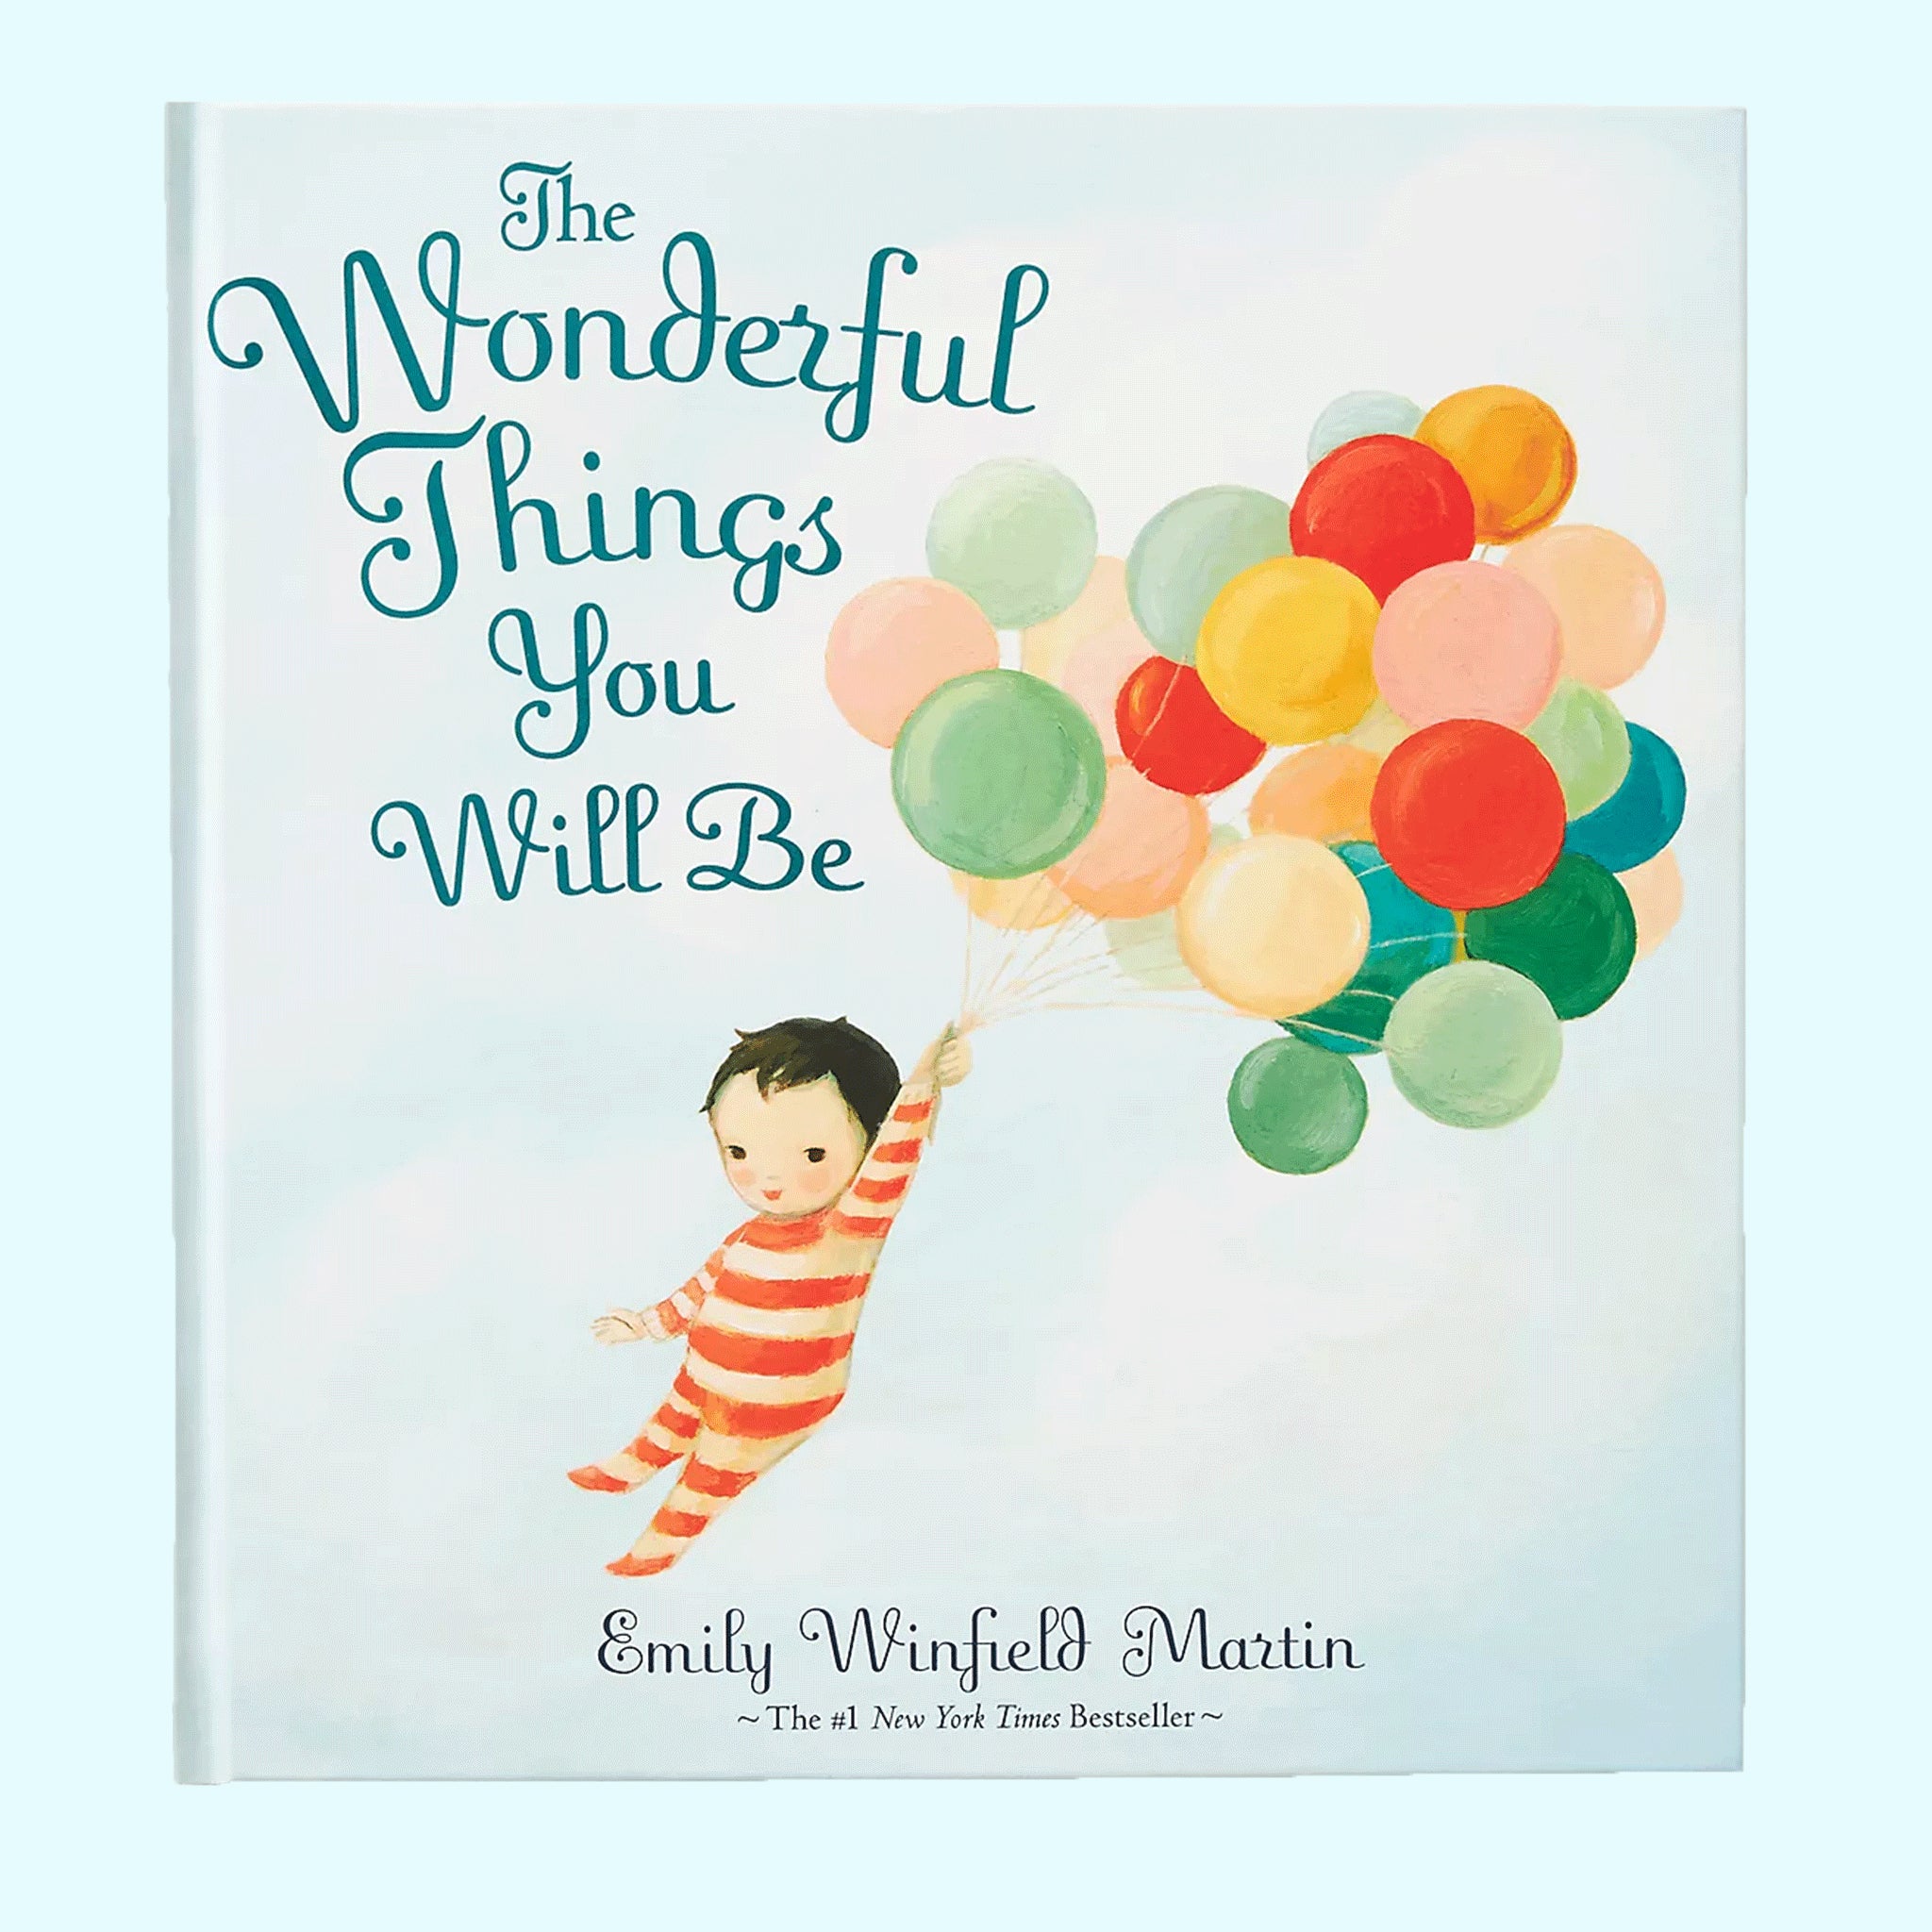 A young boy in red striped pajamas grips a bunch of colorful balloons, floating across the cover of the book. The title reads 'The Wonderful Things You Will Be' in deep teal lettering.